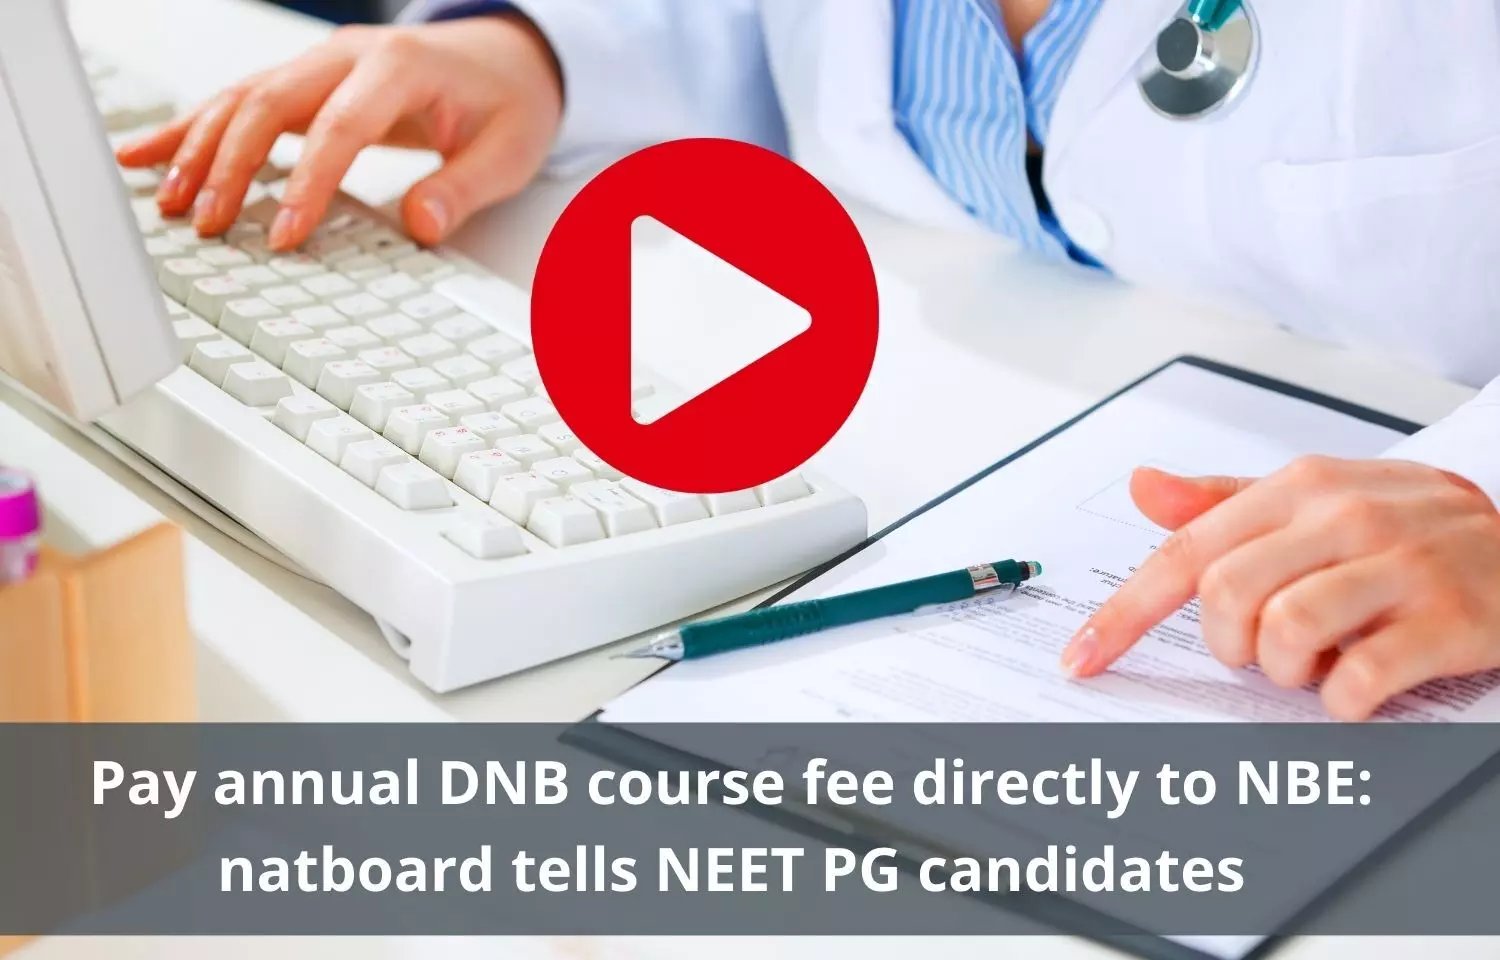 NEET PG 2021 candidates told to pay annual DNB course fee directly to NBE